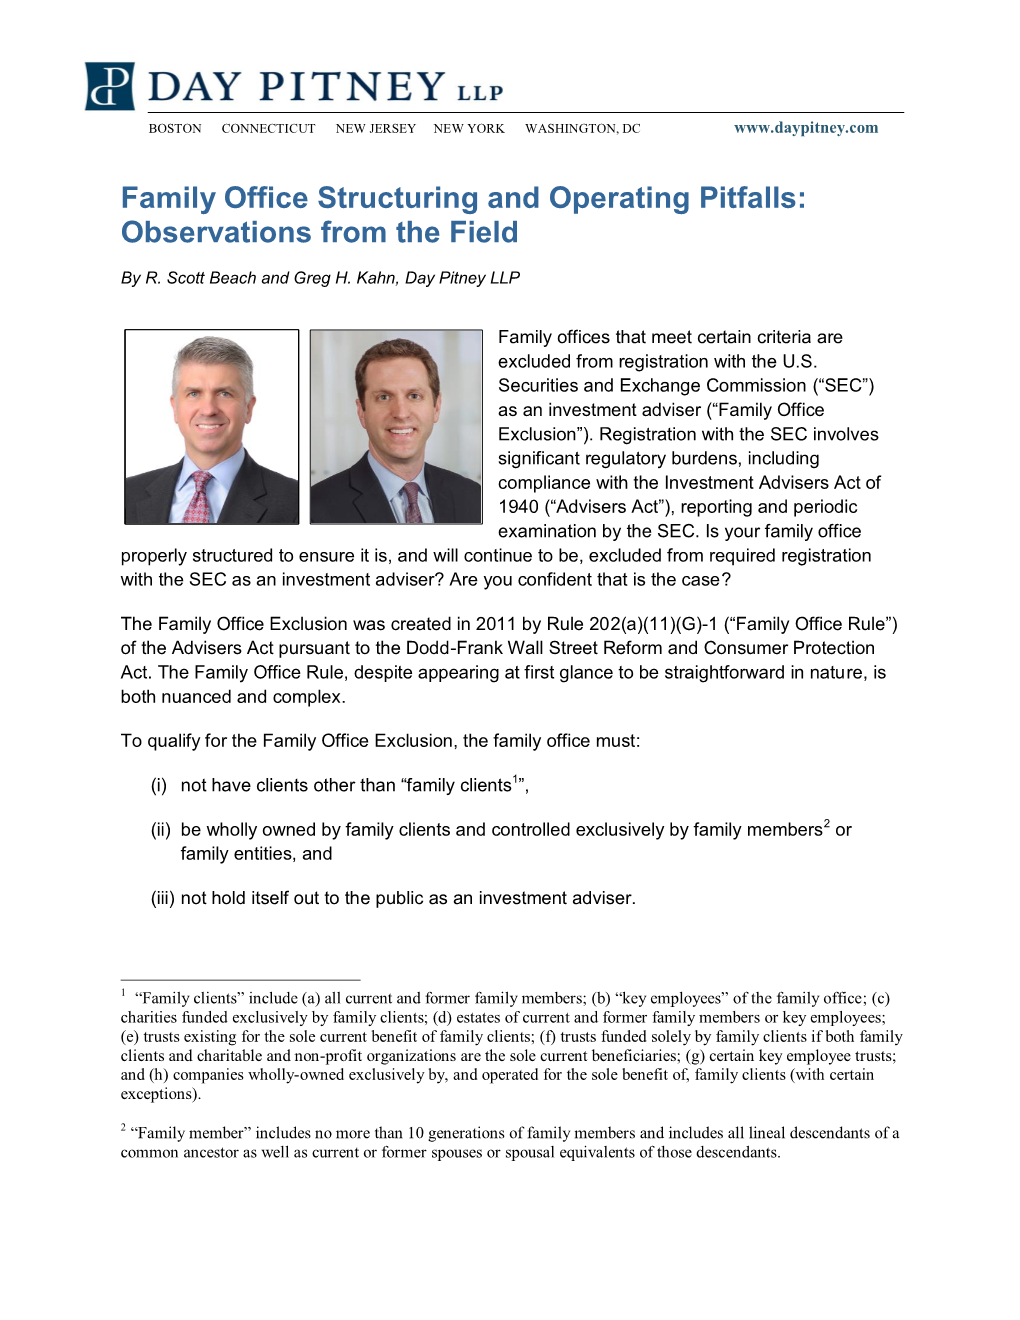 Family Office Structuring and Operating Pitfalls: Observations from the Field